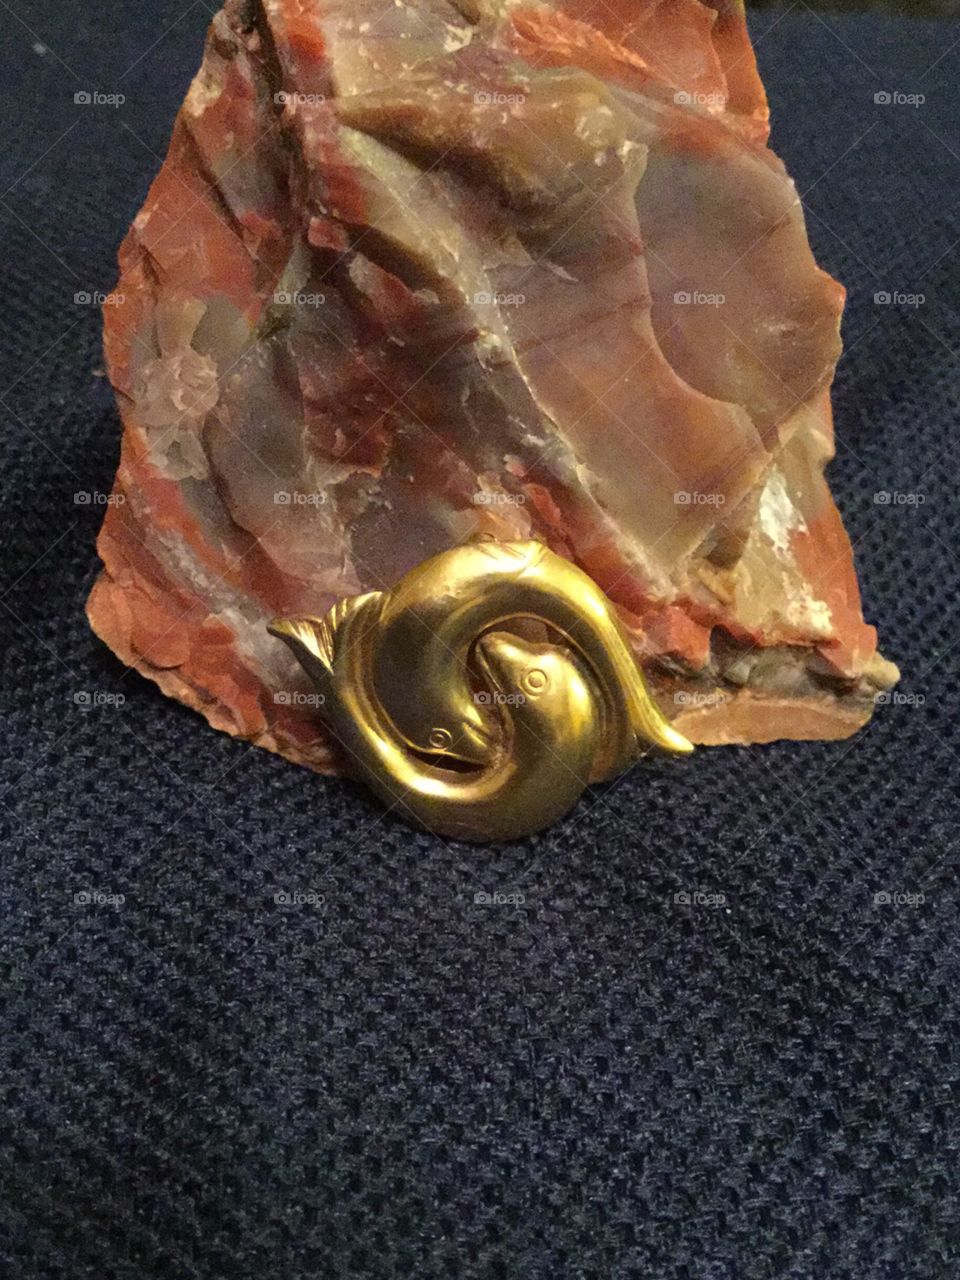 Pisces Vintage Gold Brooch And Petrified Wood